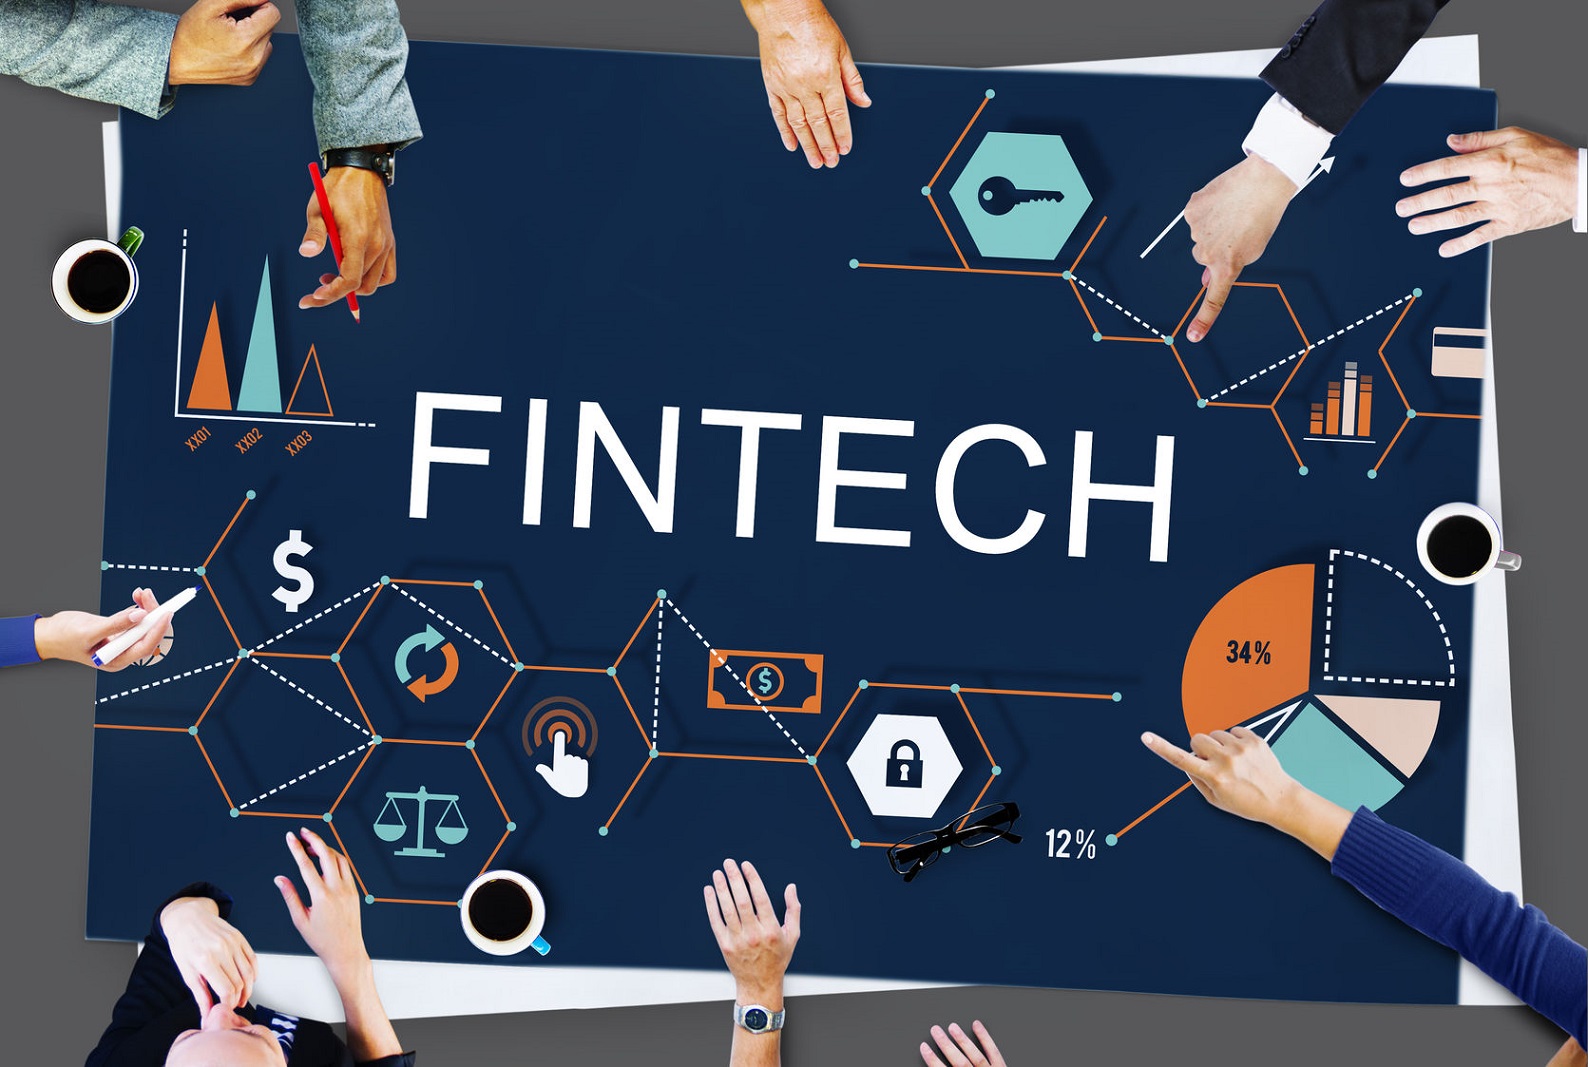 Fintech to drive Singapore’s job growth amidst rising business confidence